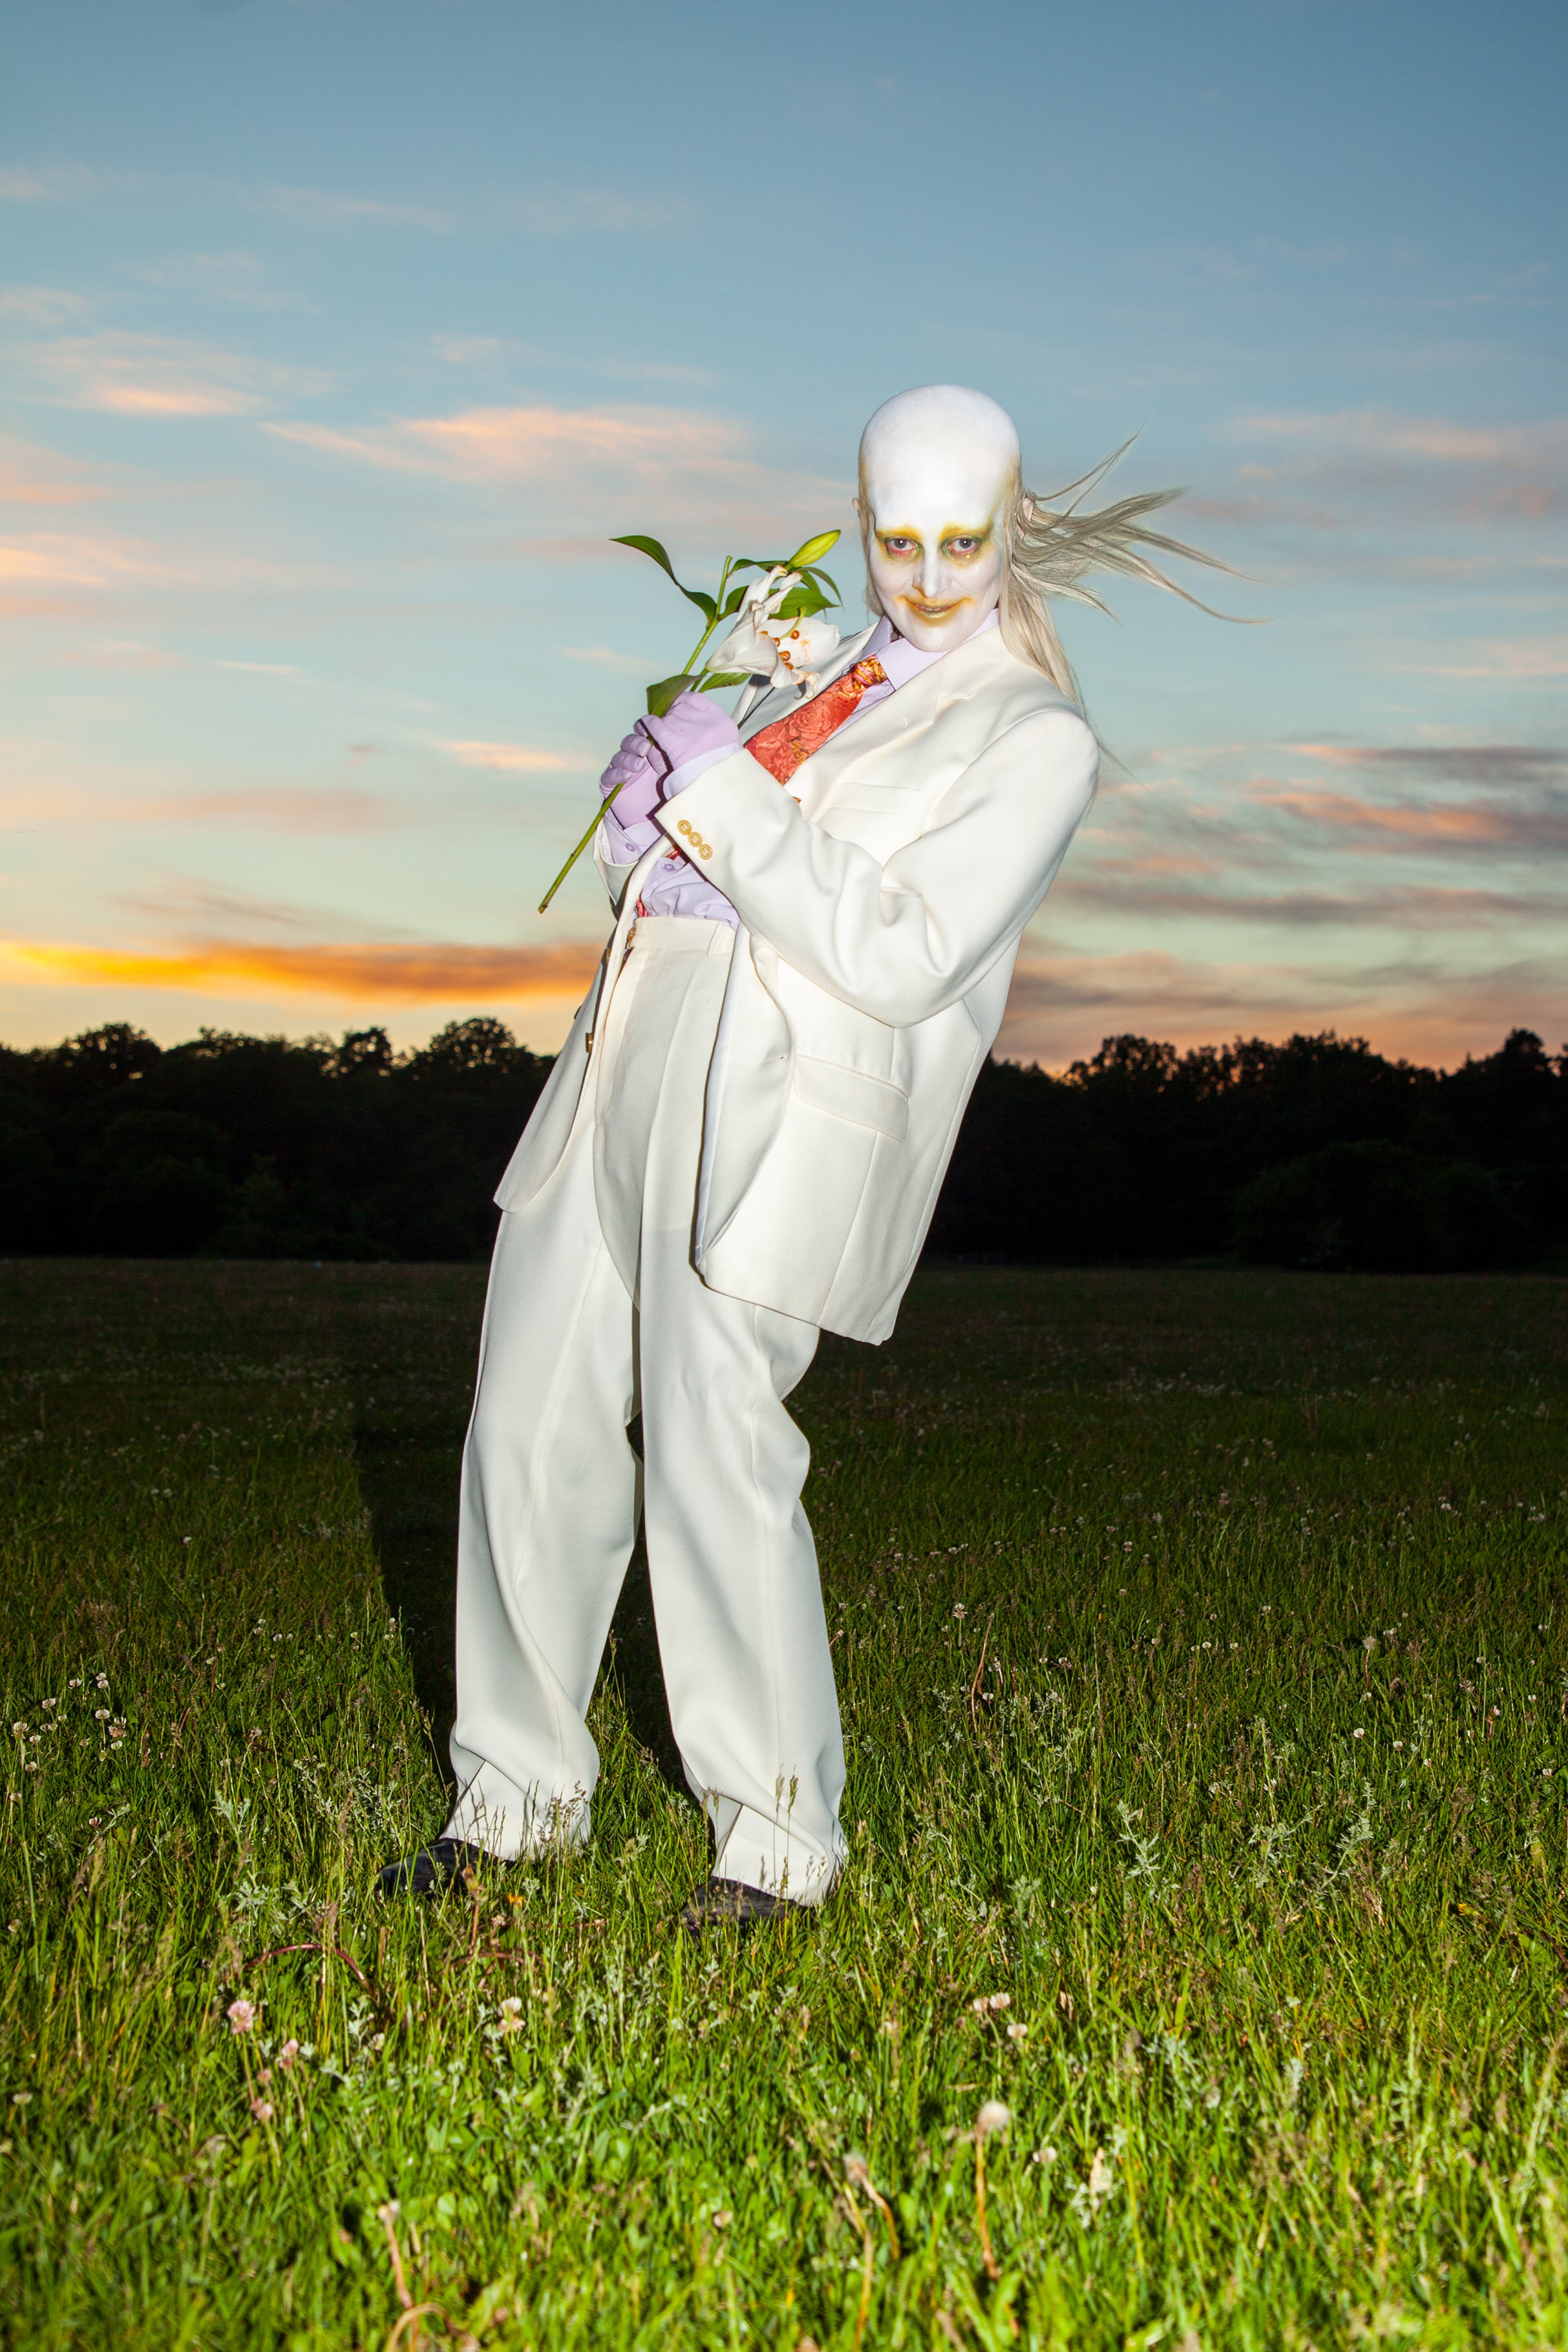 Fever Ray - There's No Place I'd Rather Be Tour - With CHRISTEENE in Oakland promo photo for Spotify presale offer code